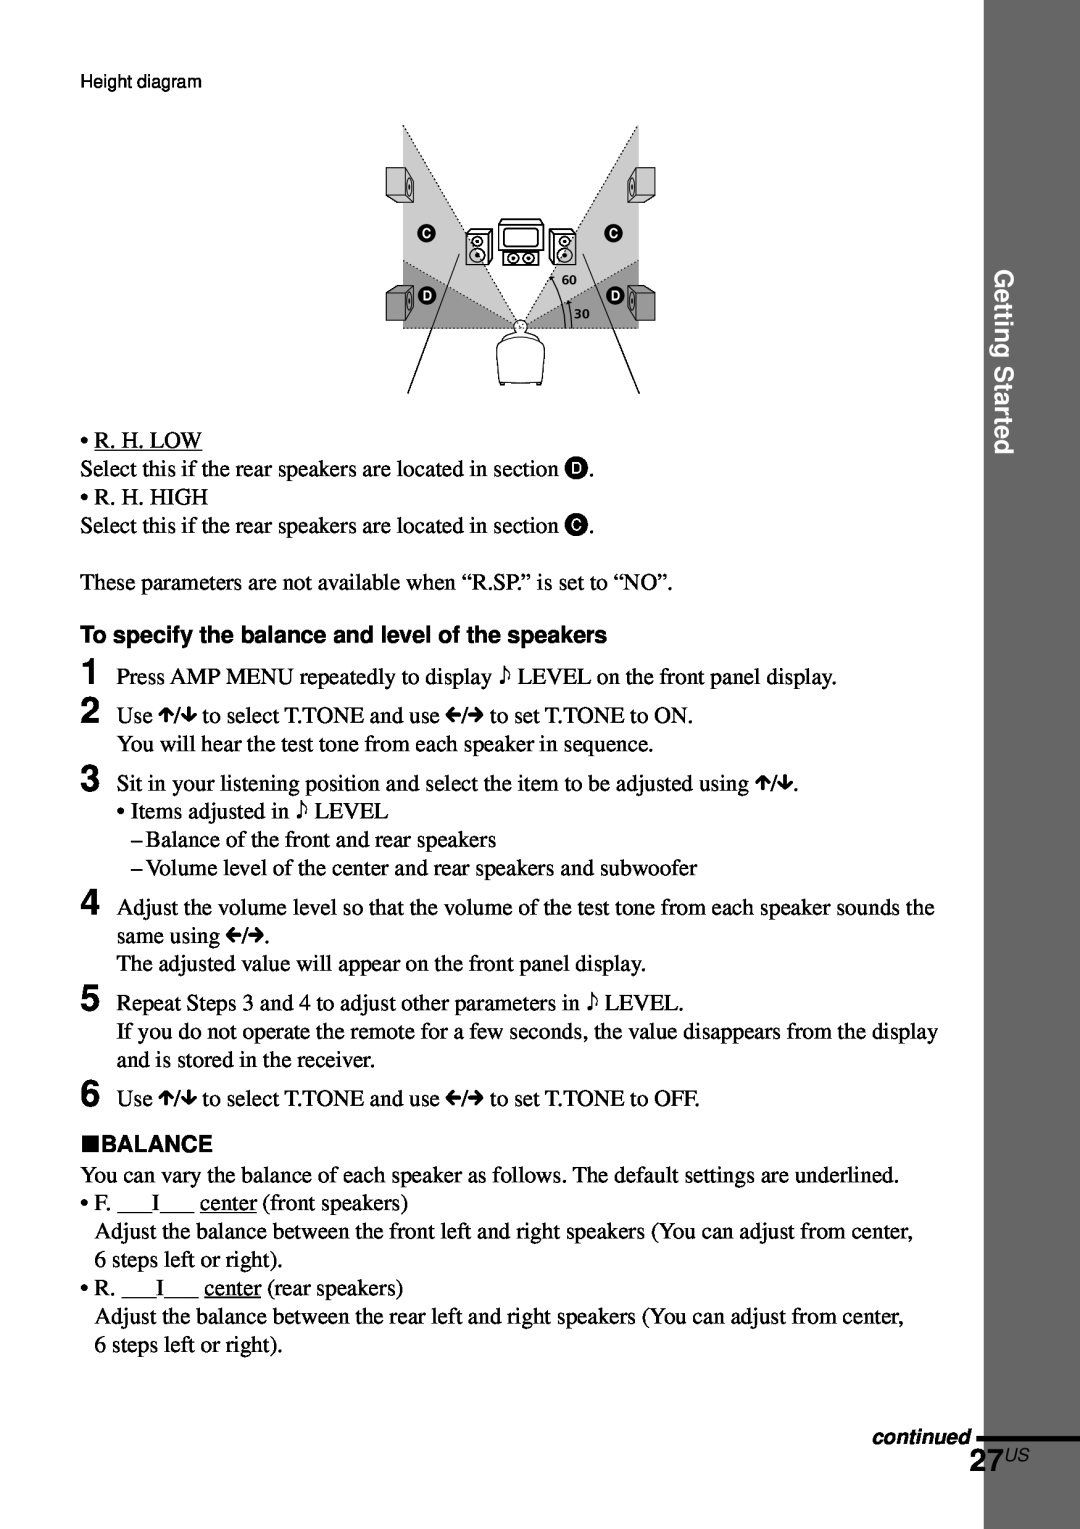 Sony AVD-S50ES operating instructions 27US, To specify the balance and level of the speakers, xBALANCE, Getting Started 